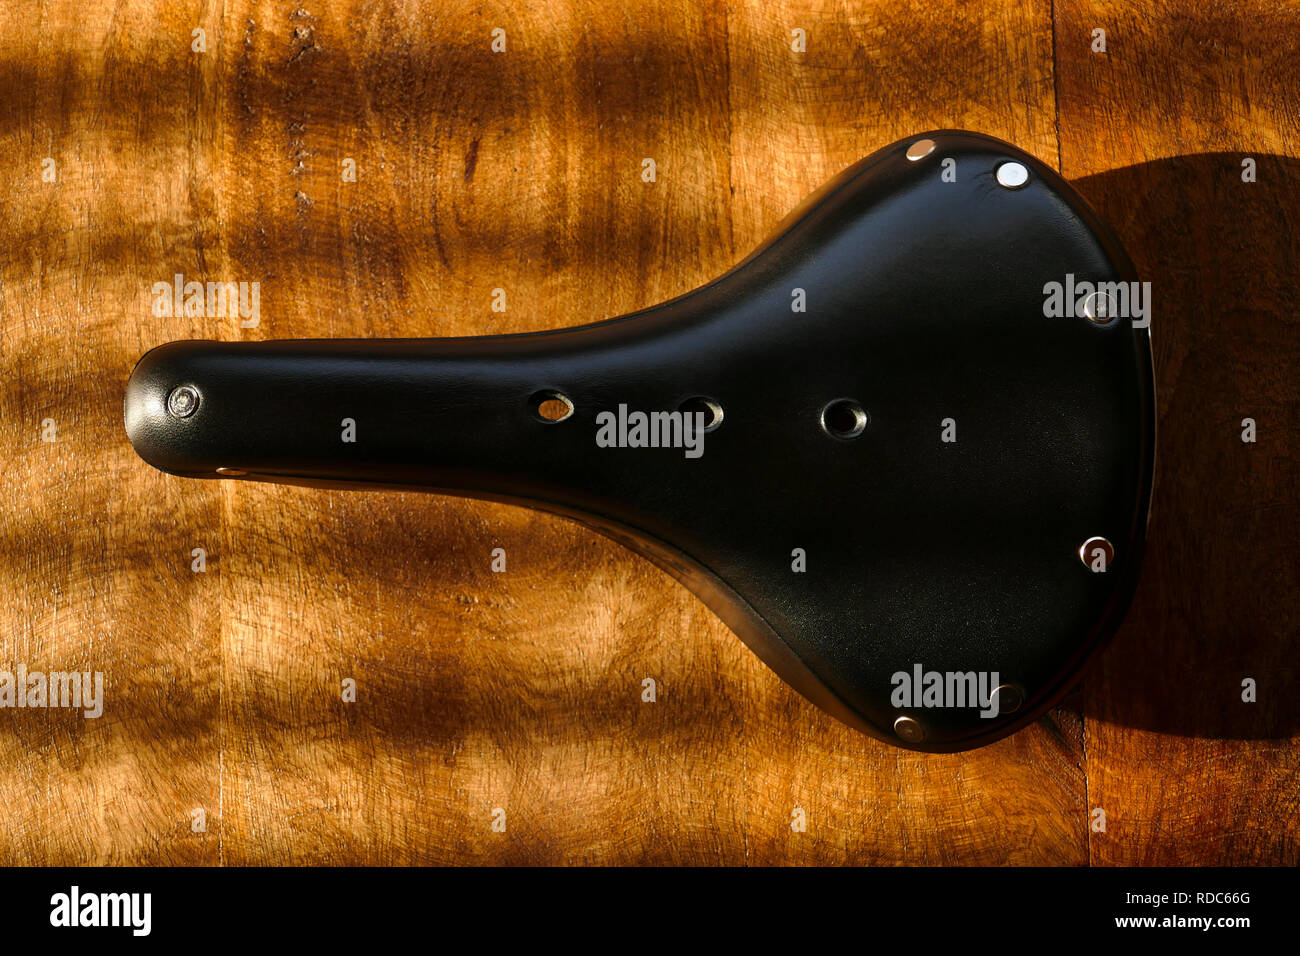 Brooks B17 standard black leather bicycle saddle on wooden table, top view Stock Photo